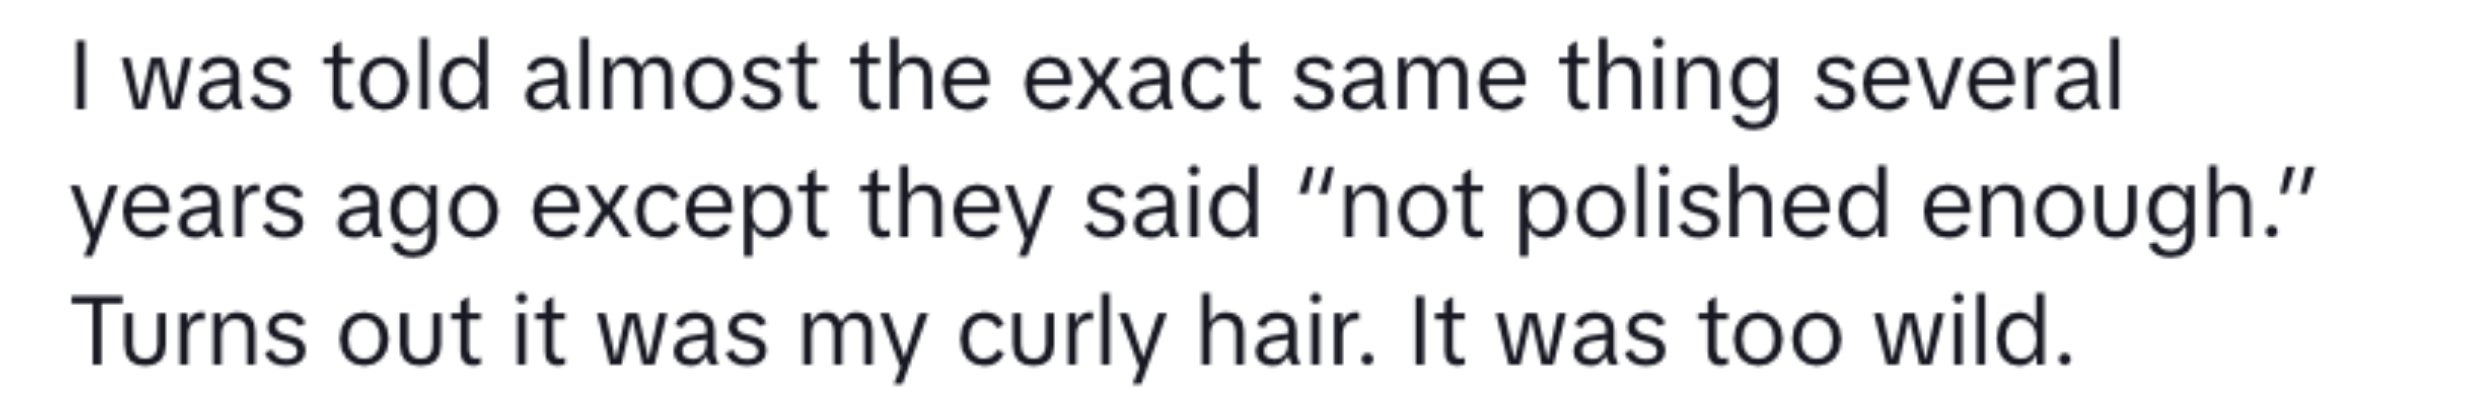 A screenshot of a social media comment by a user named &#x27;momsanity74&#x27; about curly hair being criticized as not polished enough